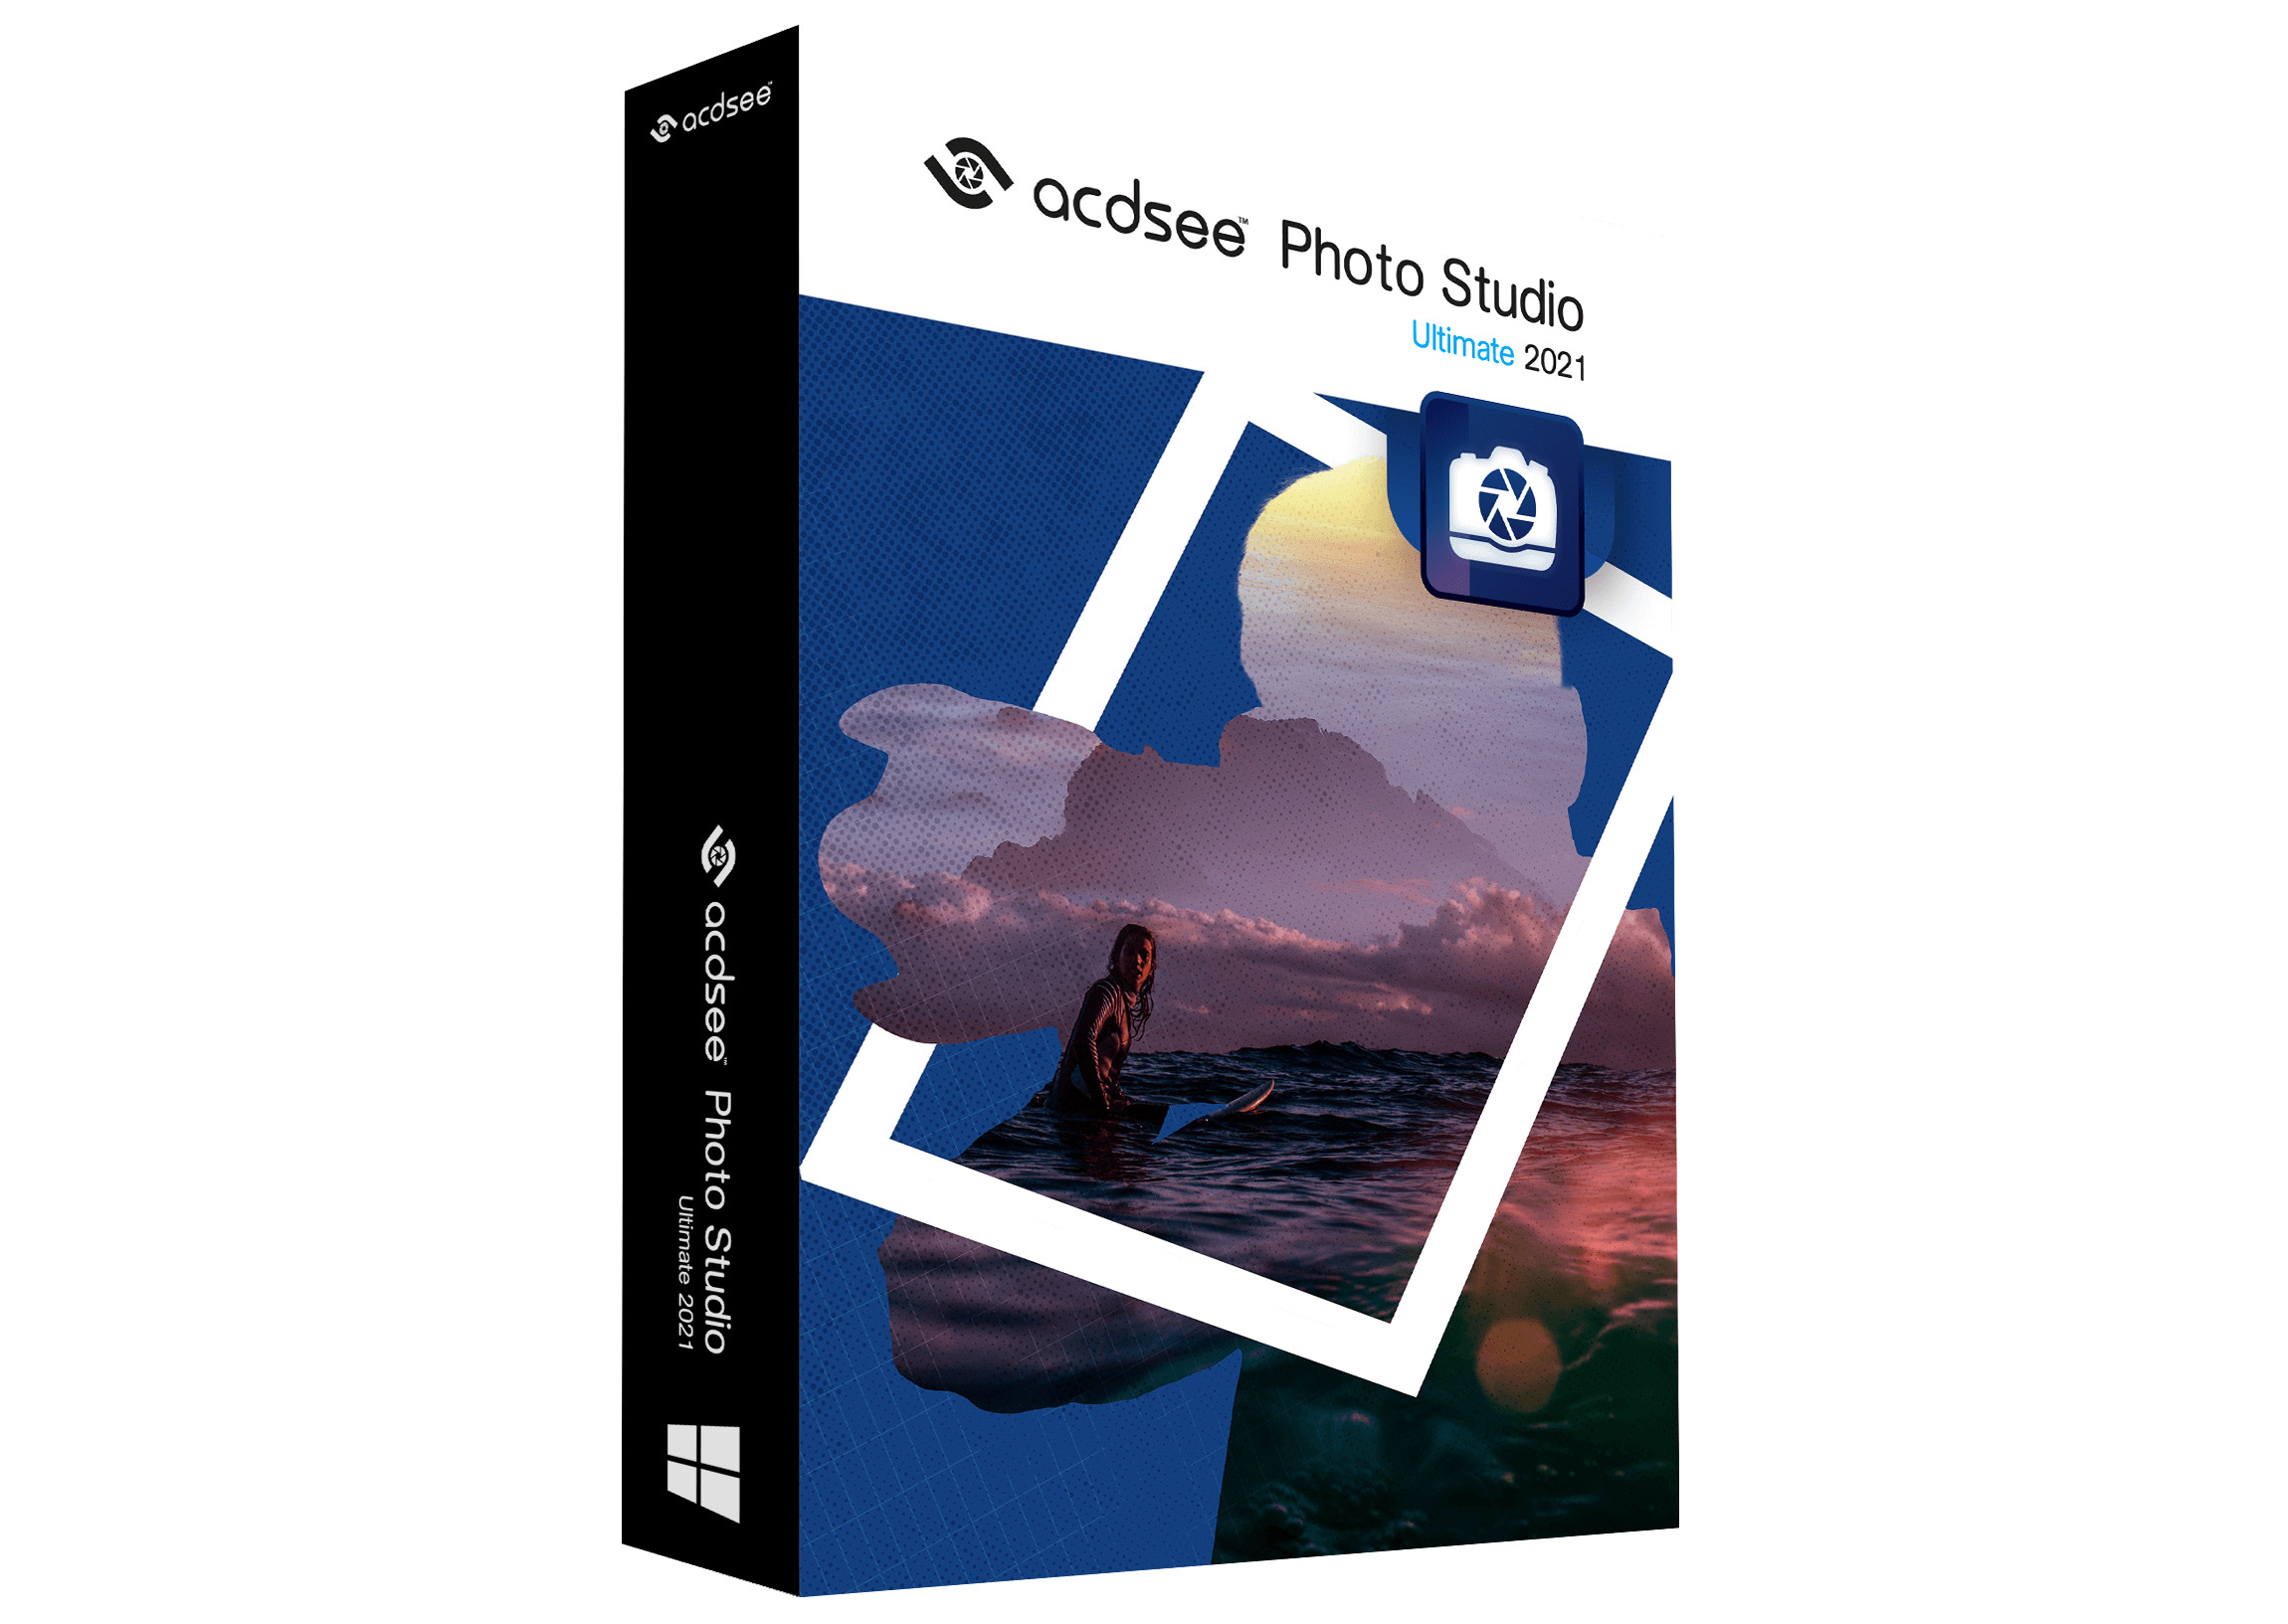 ACDSee Photo Studio Ultimate 2021 Key (6 Months / 1 PC), 11.29 usd